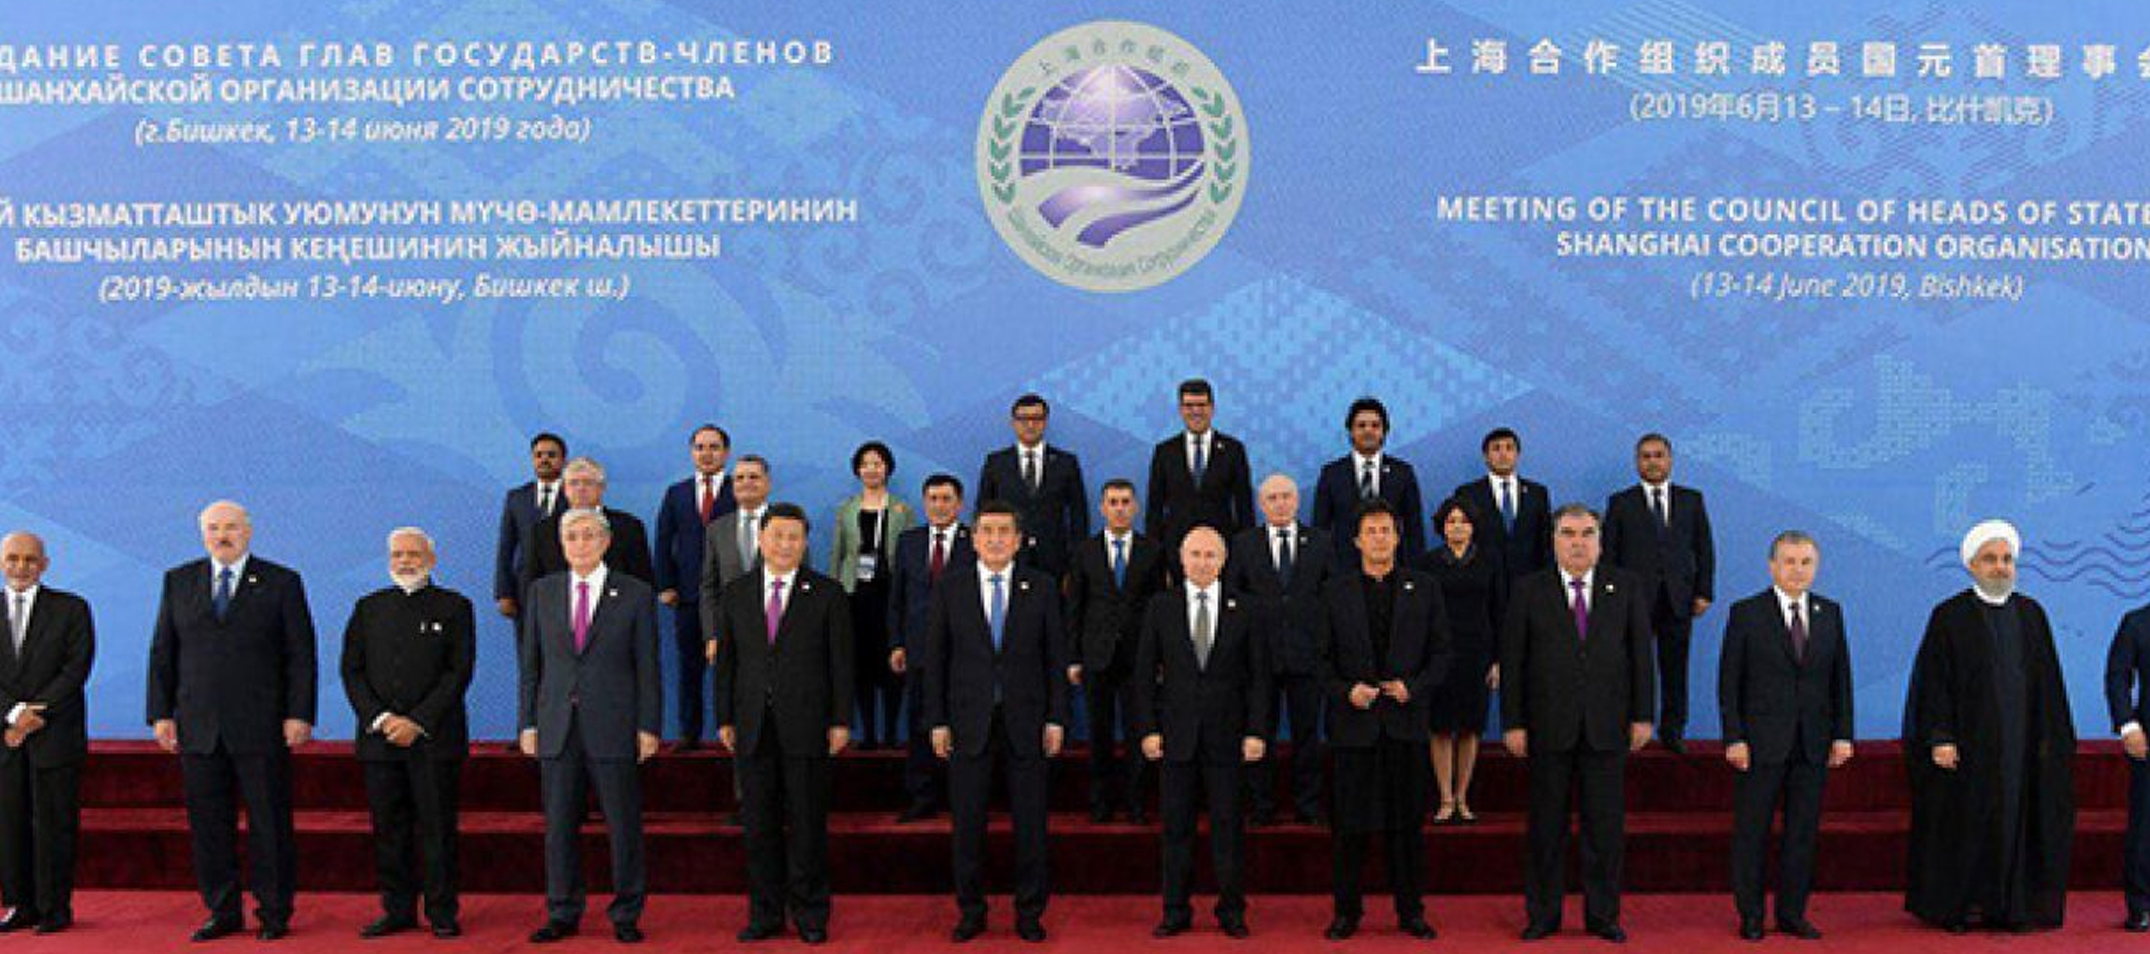 India will host 20th SCO’s CHG meeting in 2020